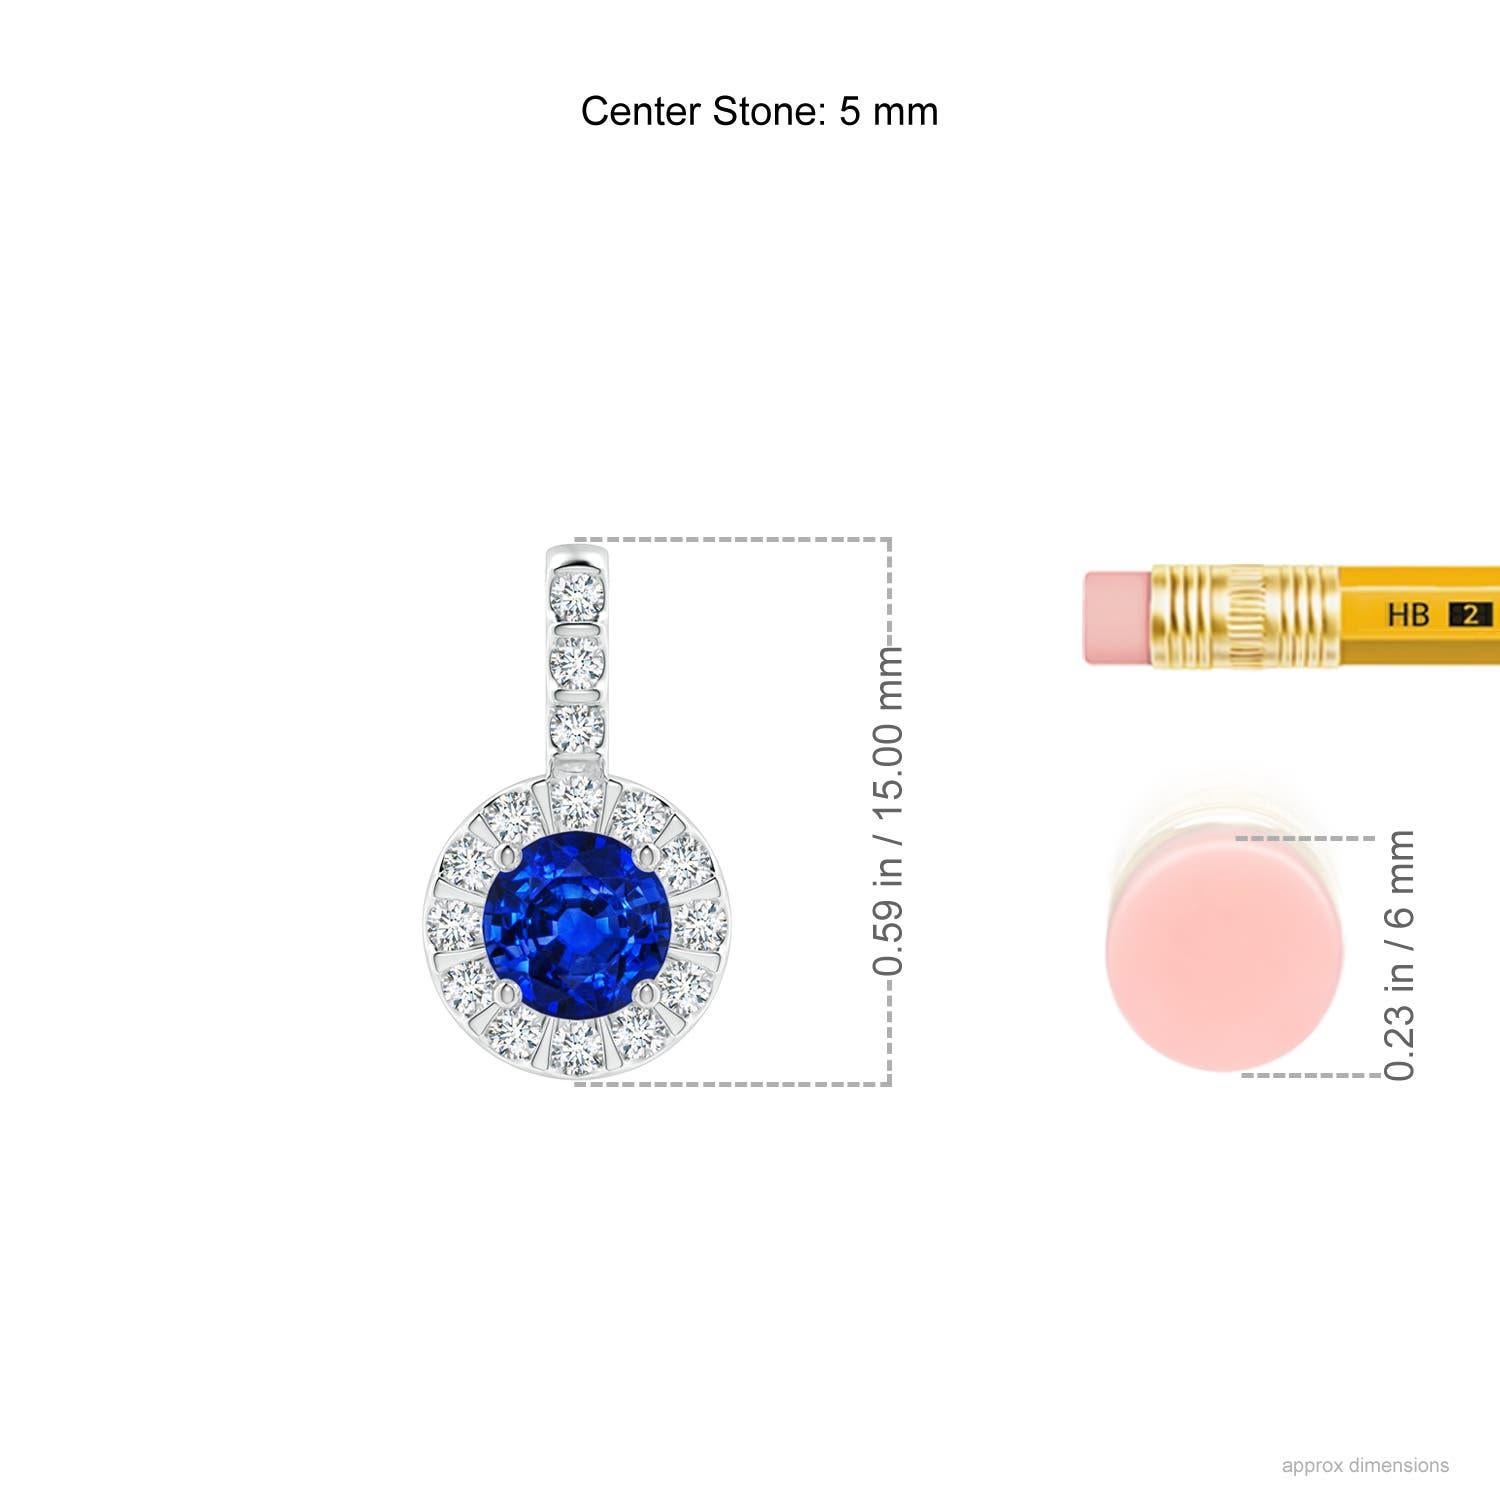 The prong set sapphire's dreamy blue color is enhanced by sparkling diamonds that surround it and adorn the bale. For a distinctive look, the diamonds are mounted in a bar setting. This elegant and stylish sapphire halo pendant is sculpted in